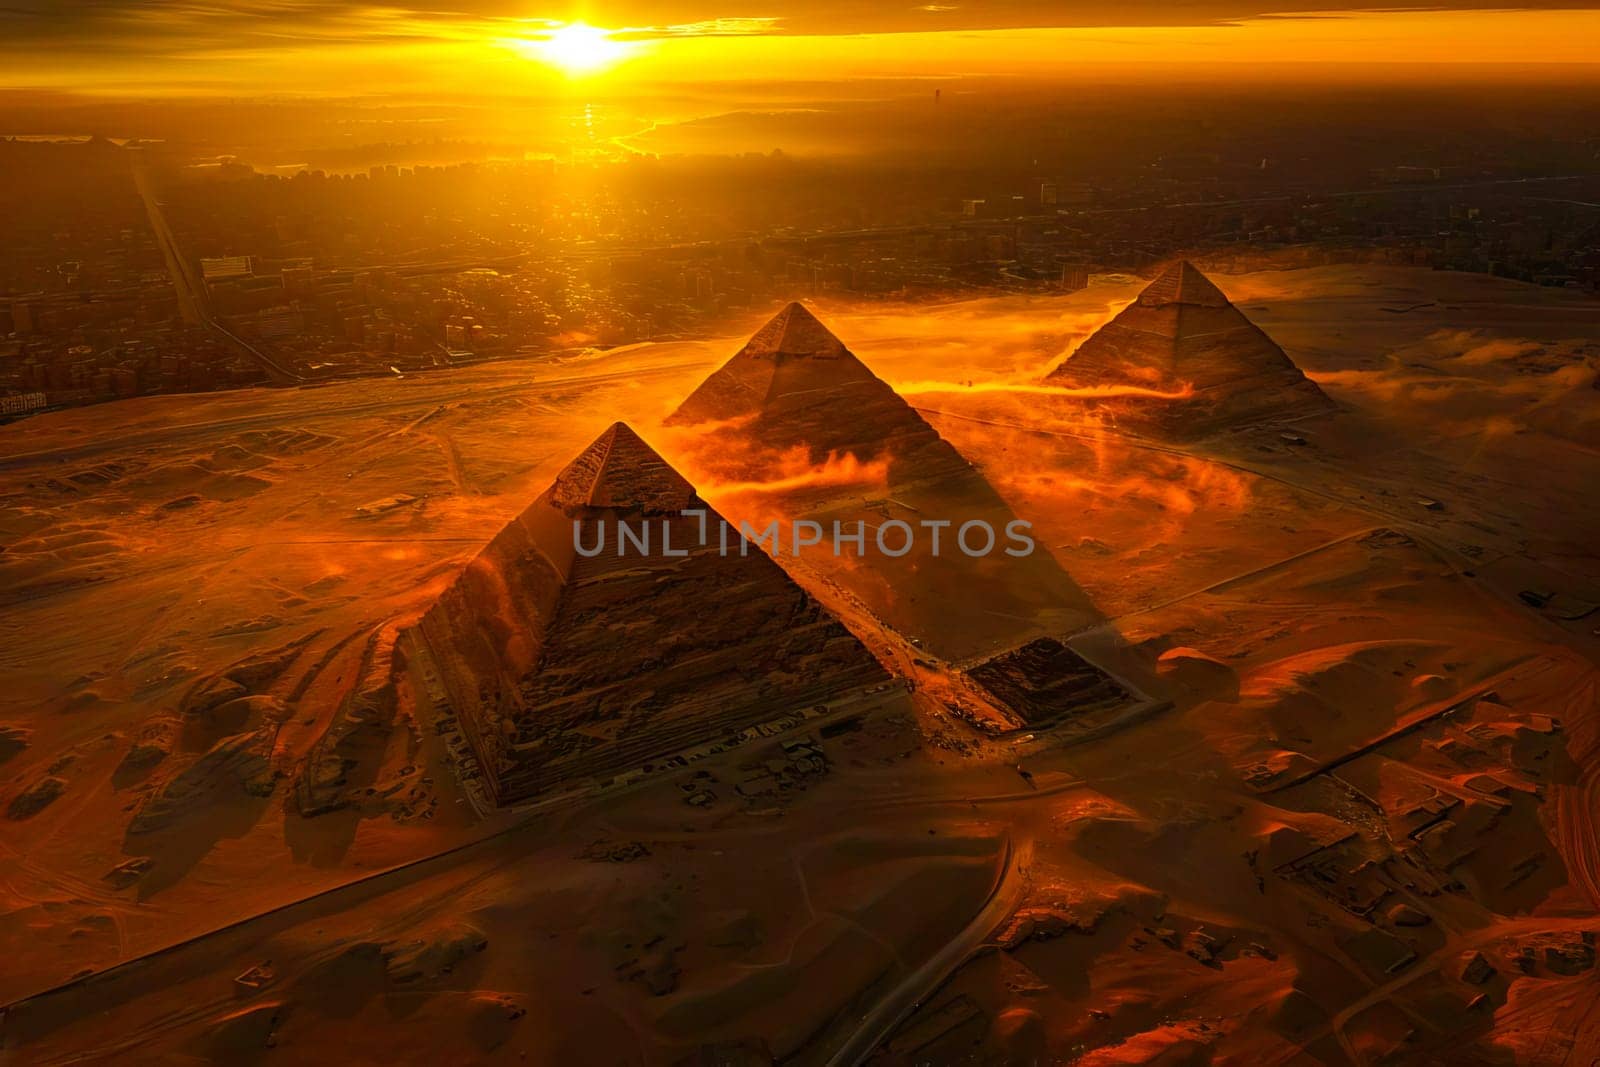 Aerial view of the iconic Pyramids of Giza shining in the warm light of the setting sun.